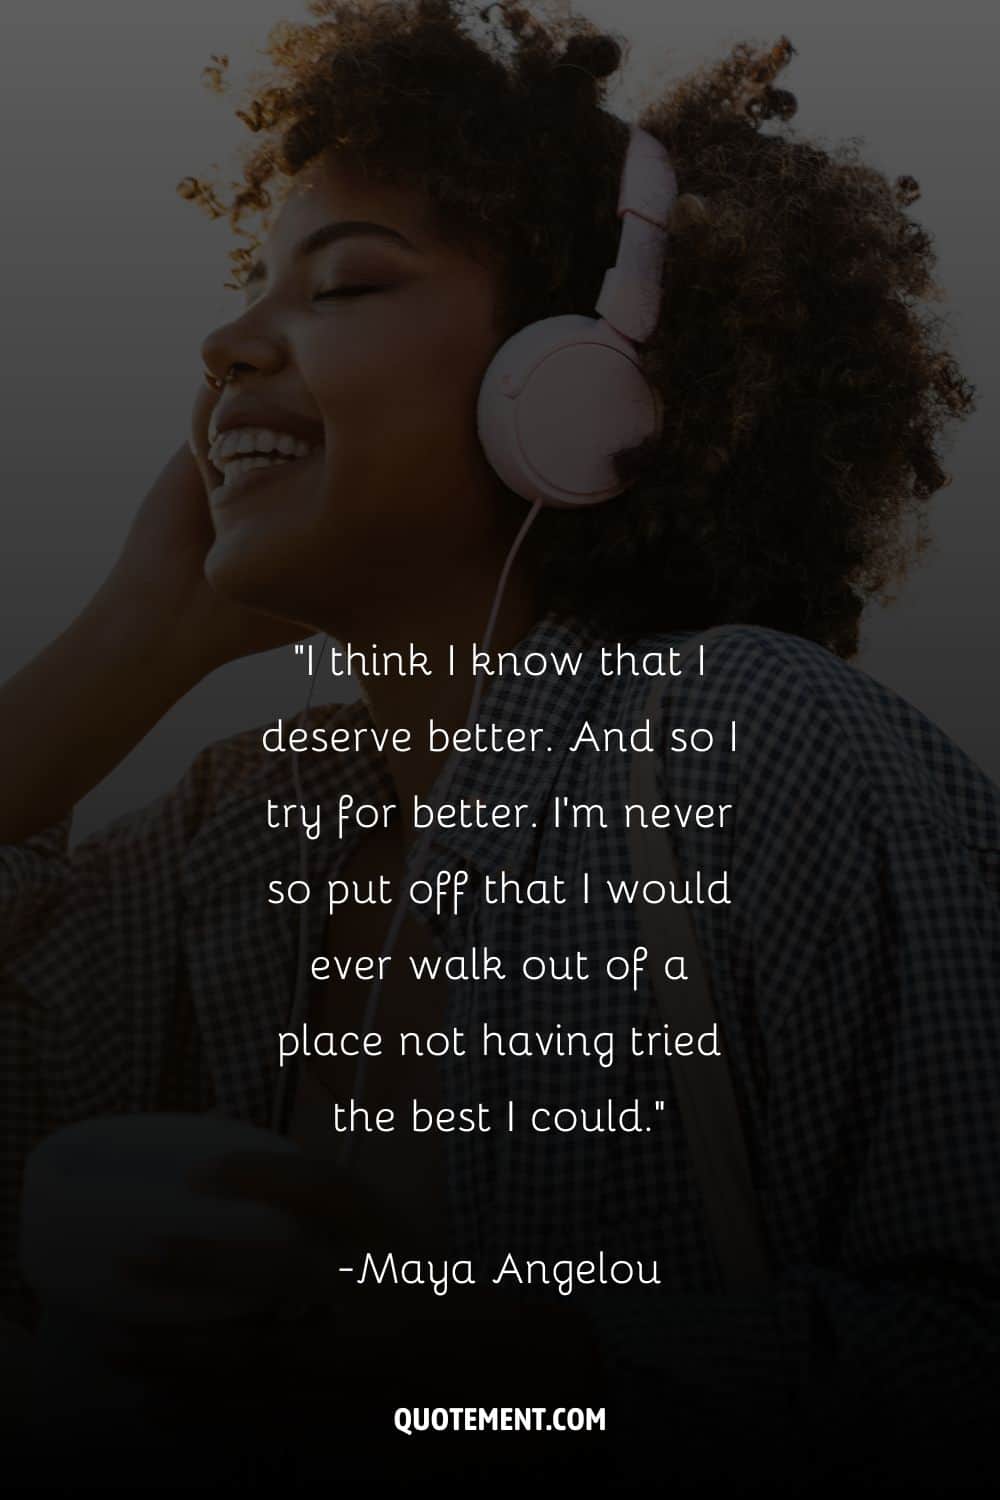 gorgeous girl with closed eyes enjoying headphones representing the greatest I deserve better quote